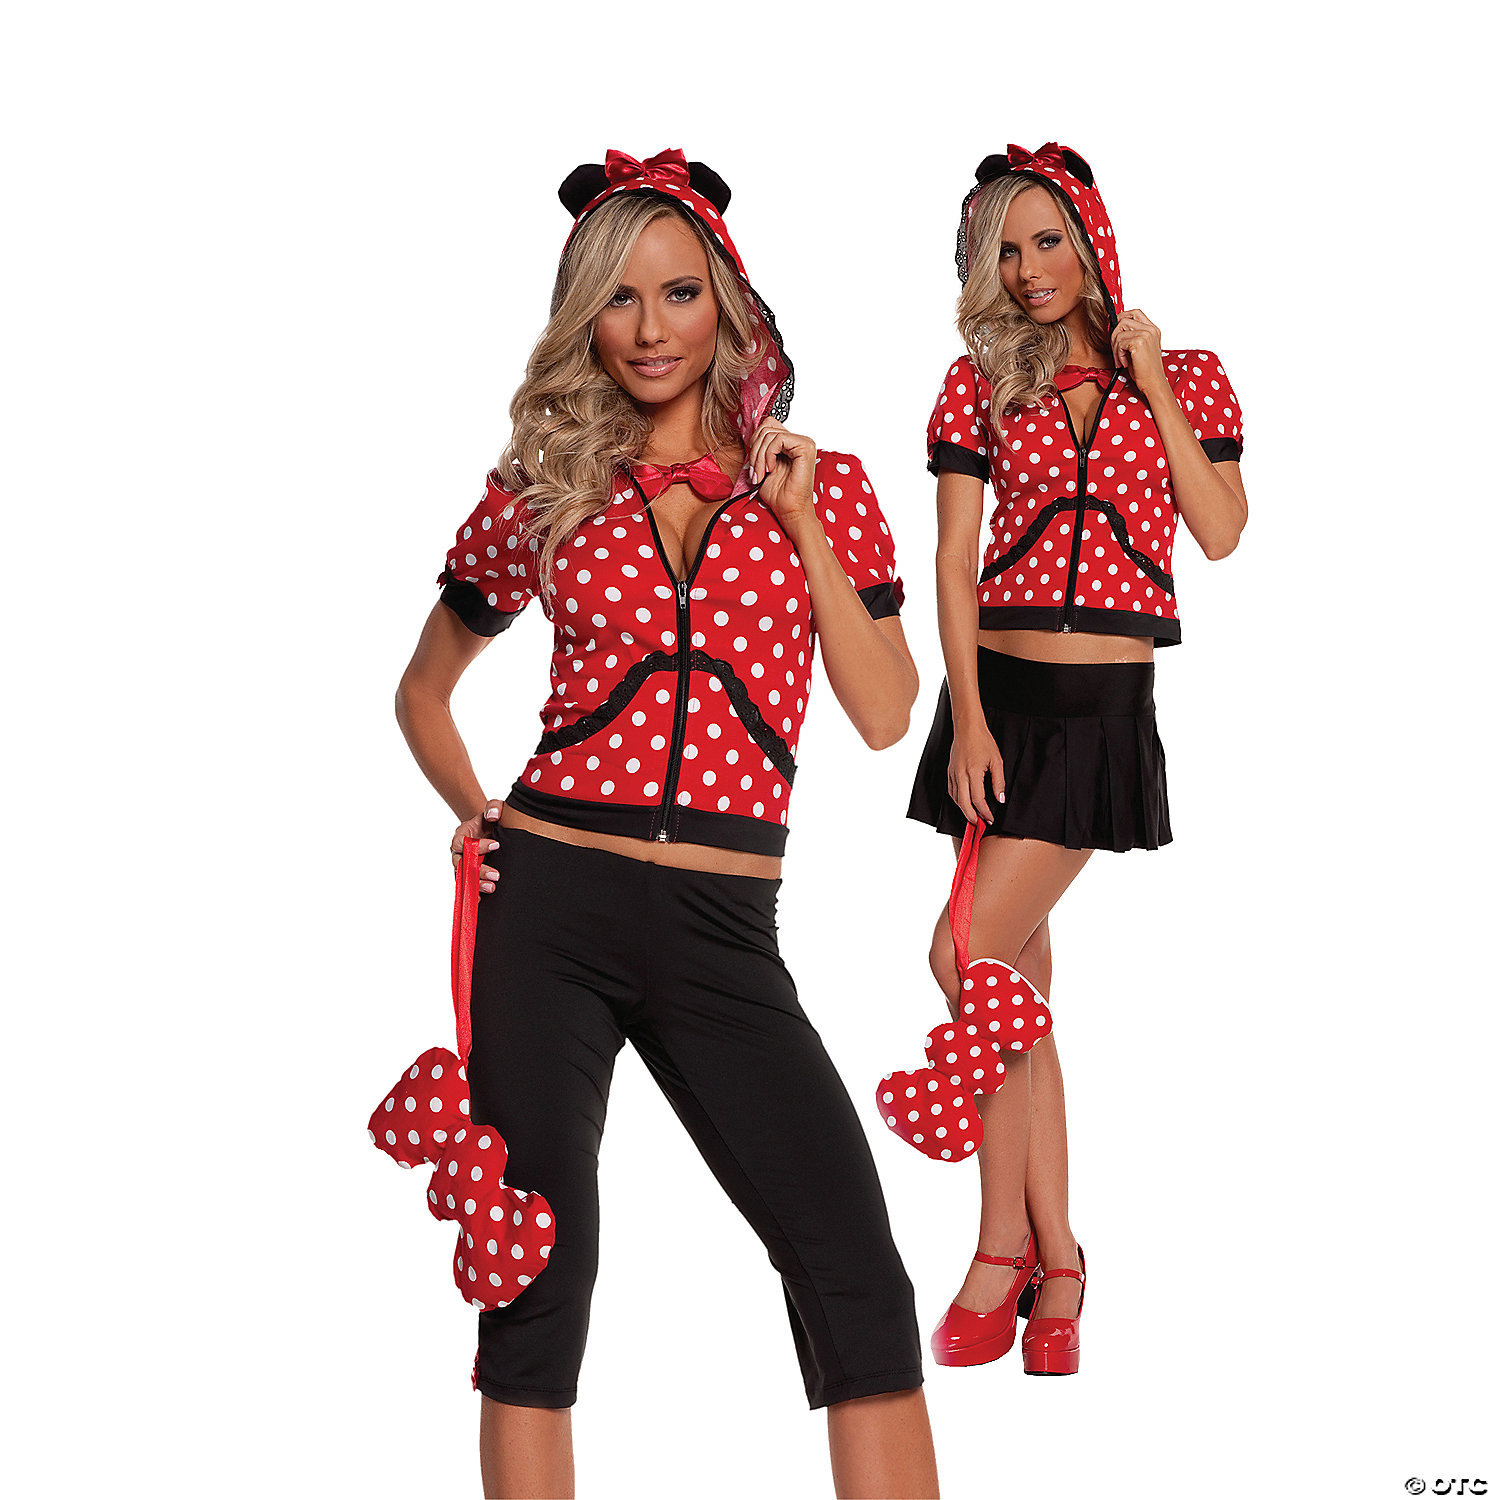 WMN'S MISSE MOUSE-MD - HALLOWEEN